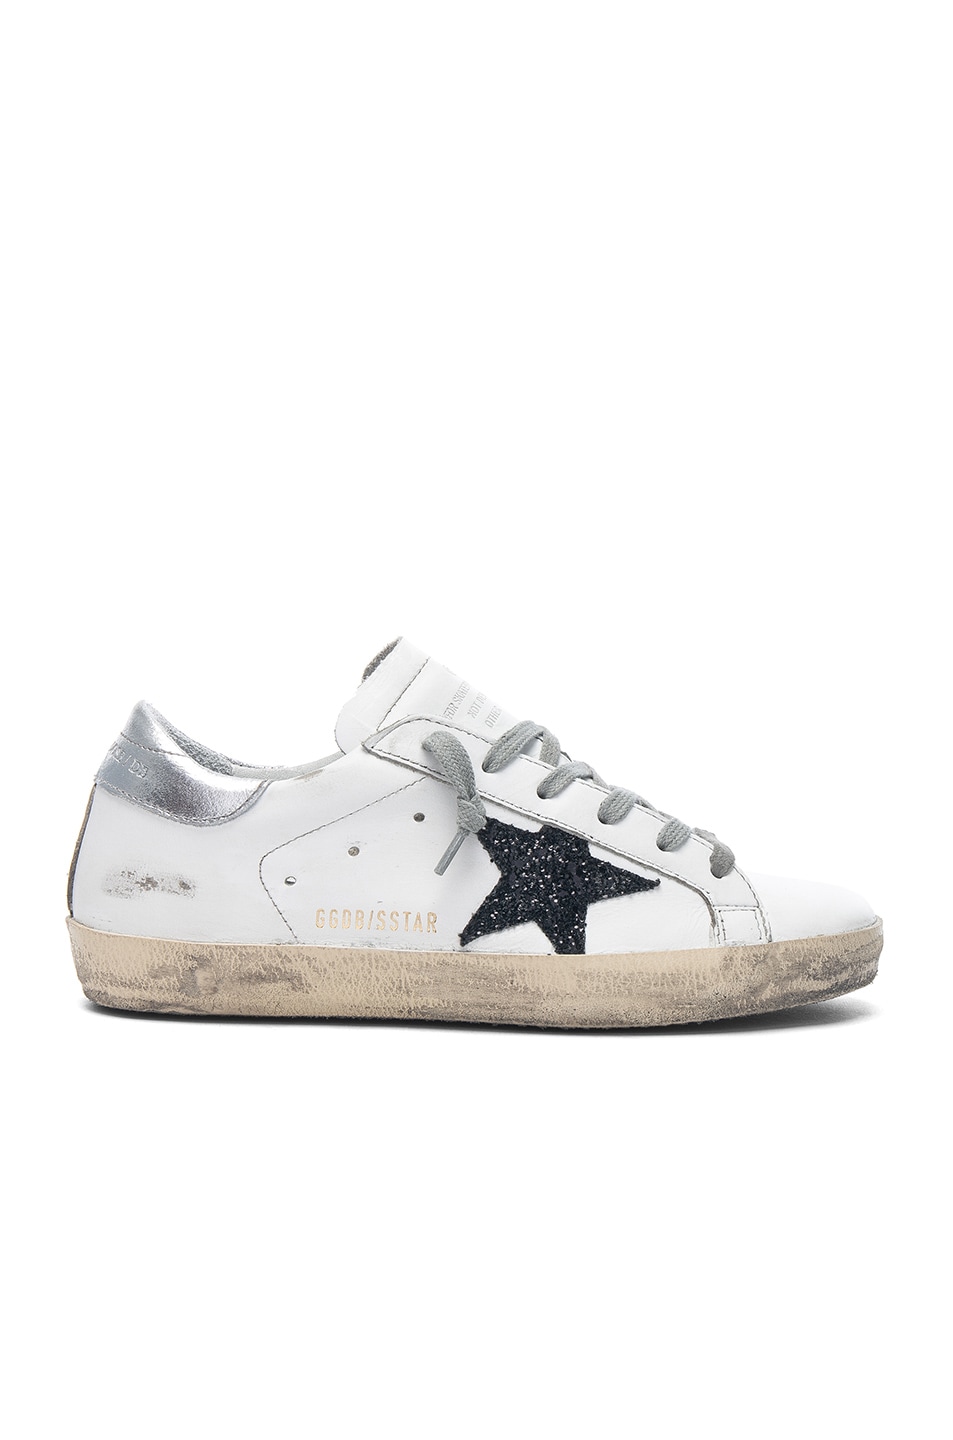 Image 1 of Golden Goose Superstar Sneakers in White Leather & Black Glitter